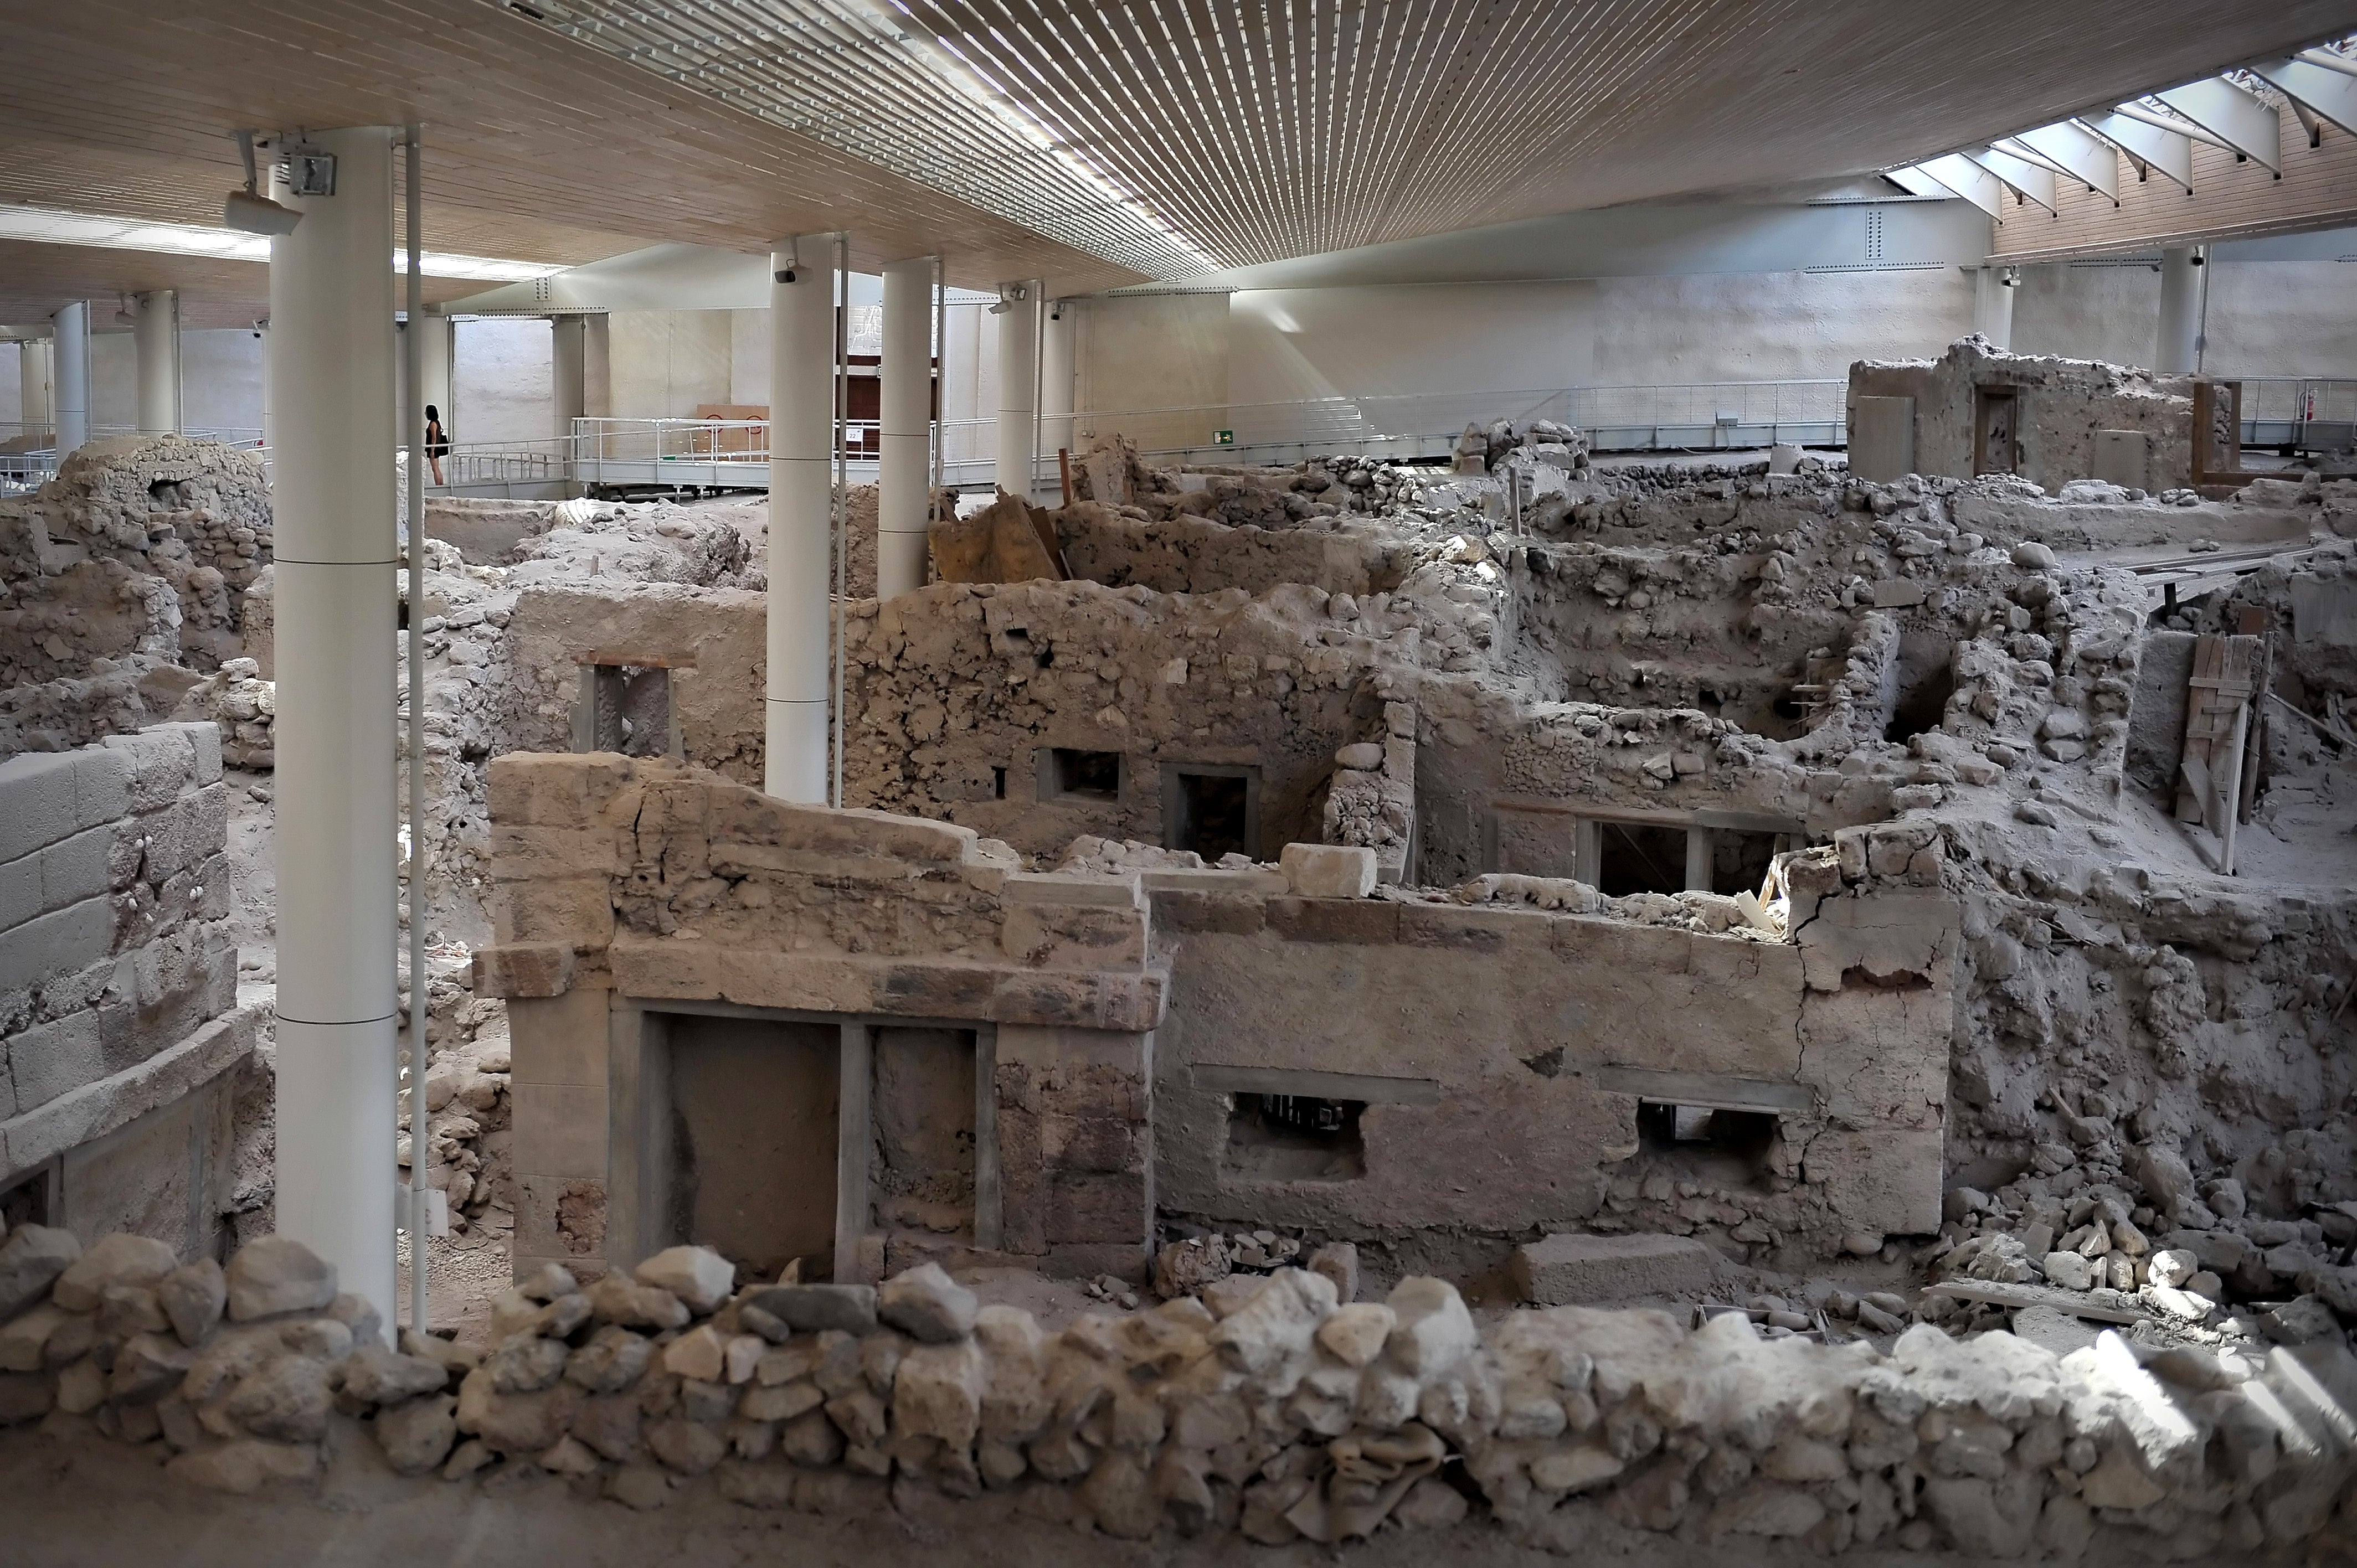 The archaeological site of Akrotiri, once a Minoan town on Santorini. (Photo: LOUISA GOULIAMAKI/AFP, Getty Images)